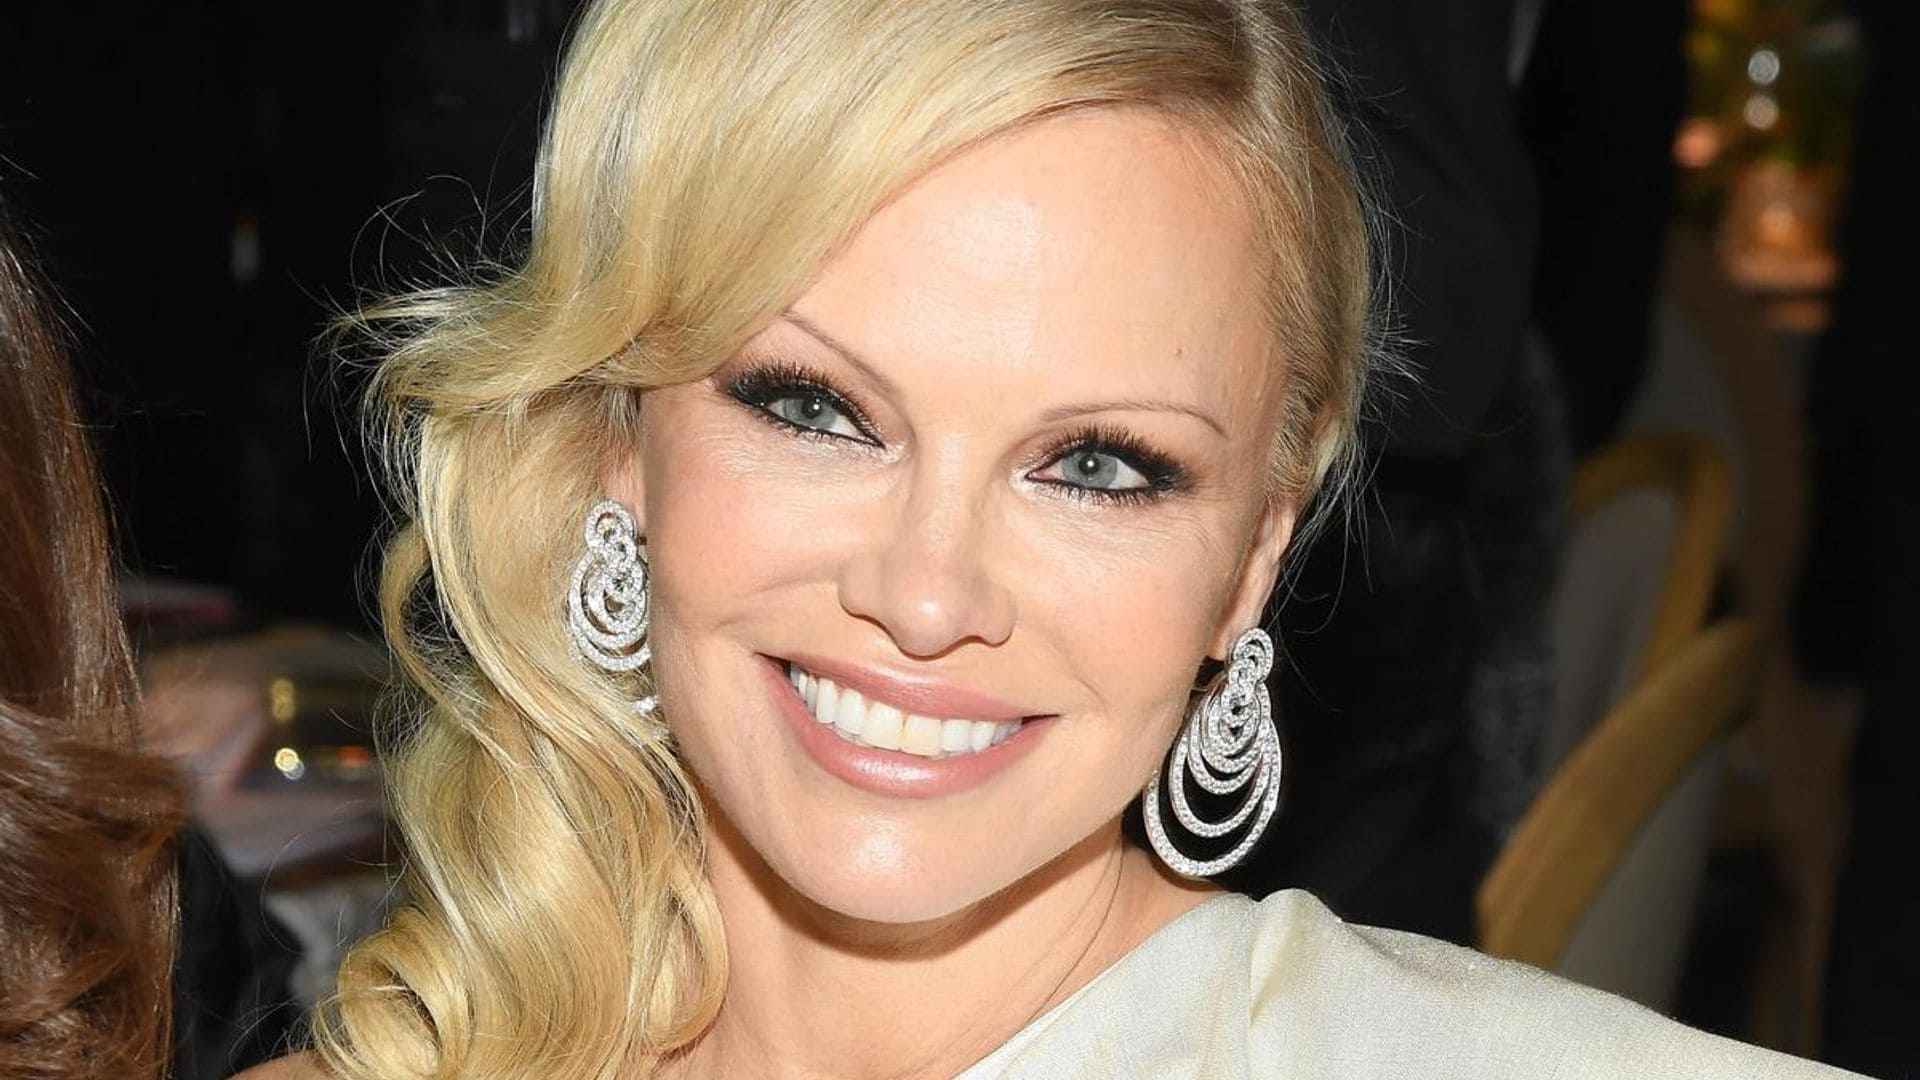 Pamela Anderson teams up with Netflix for a new documentary about her life: ‘Not a victim, but a survivor’